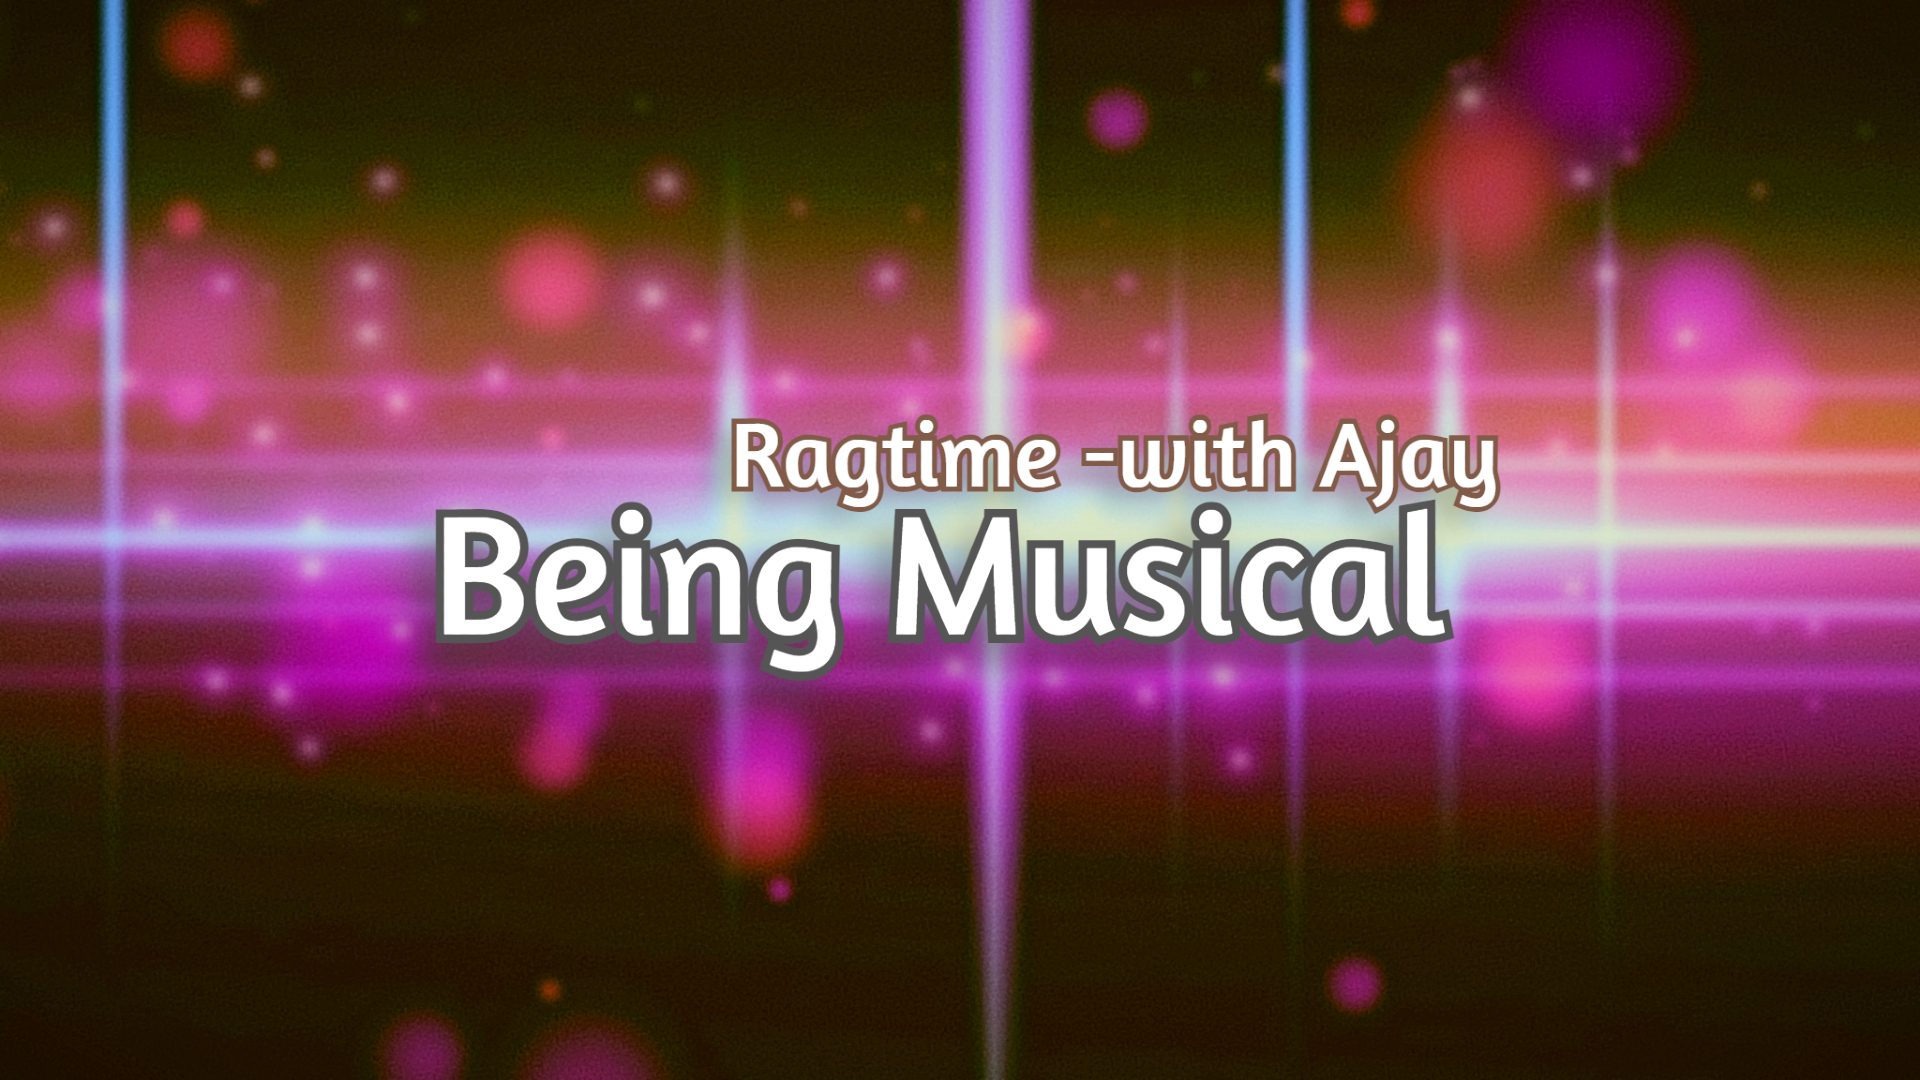 Ragtime -with Ajay